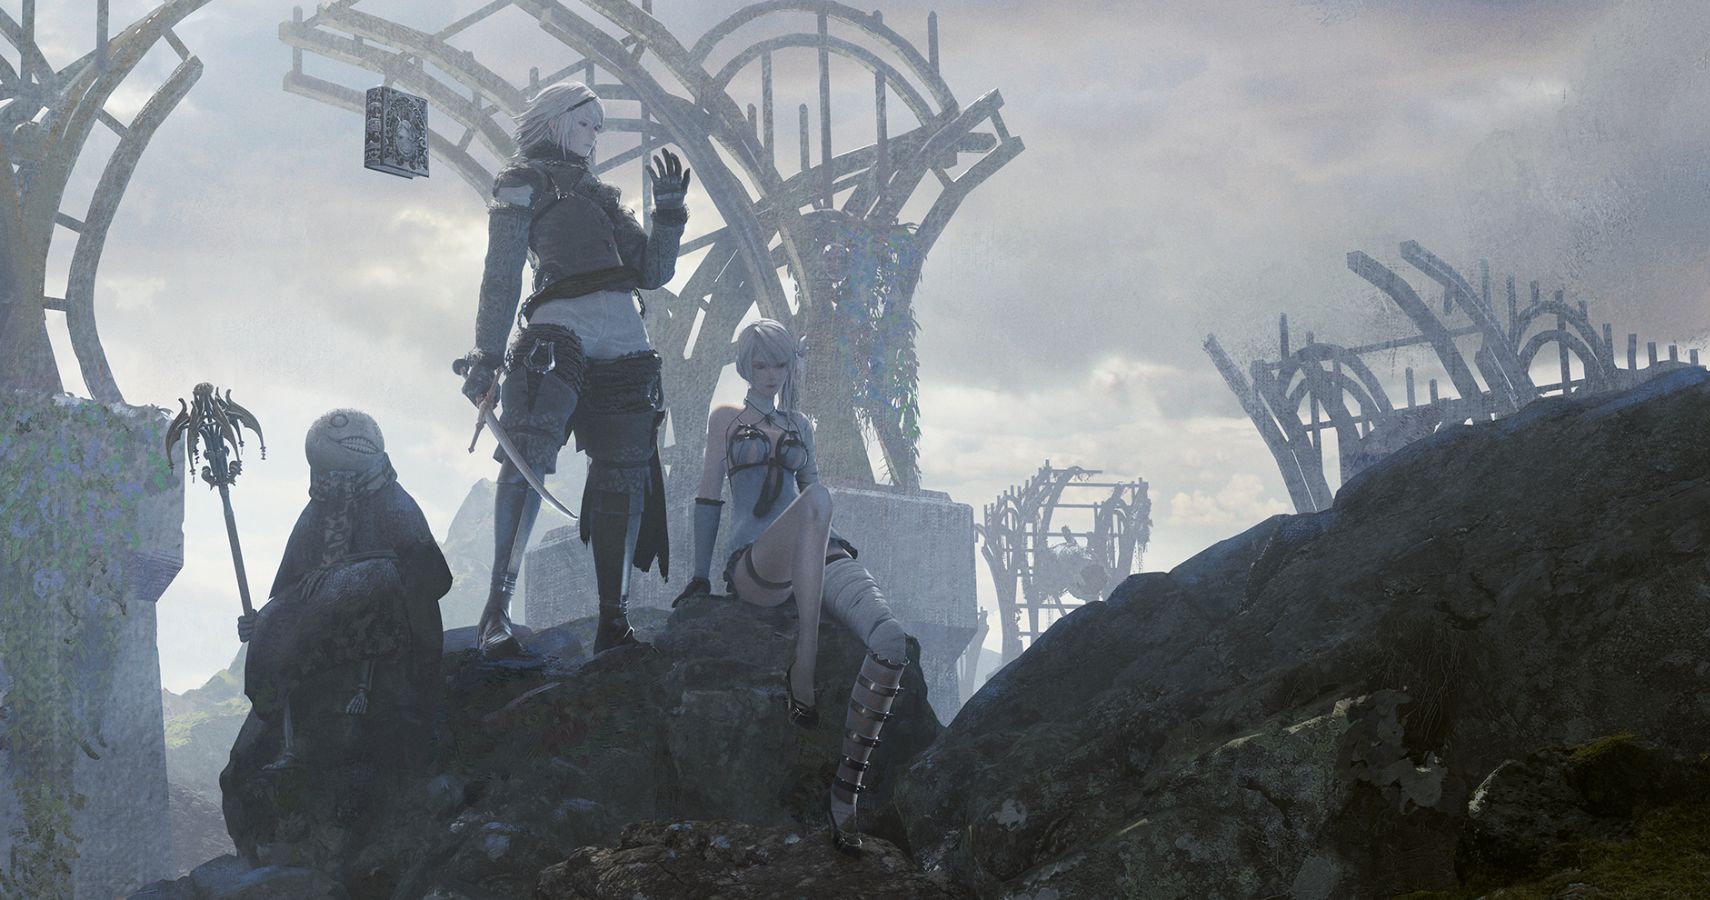 Nier Replicant's protagonists stand in the remnants of Earth